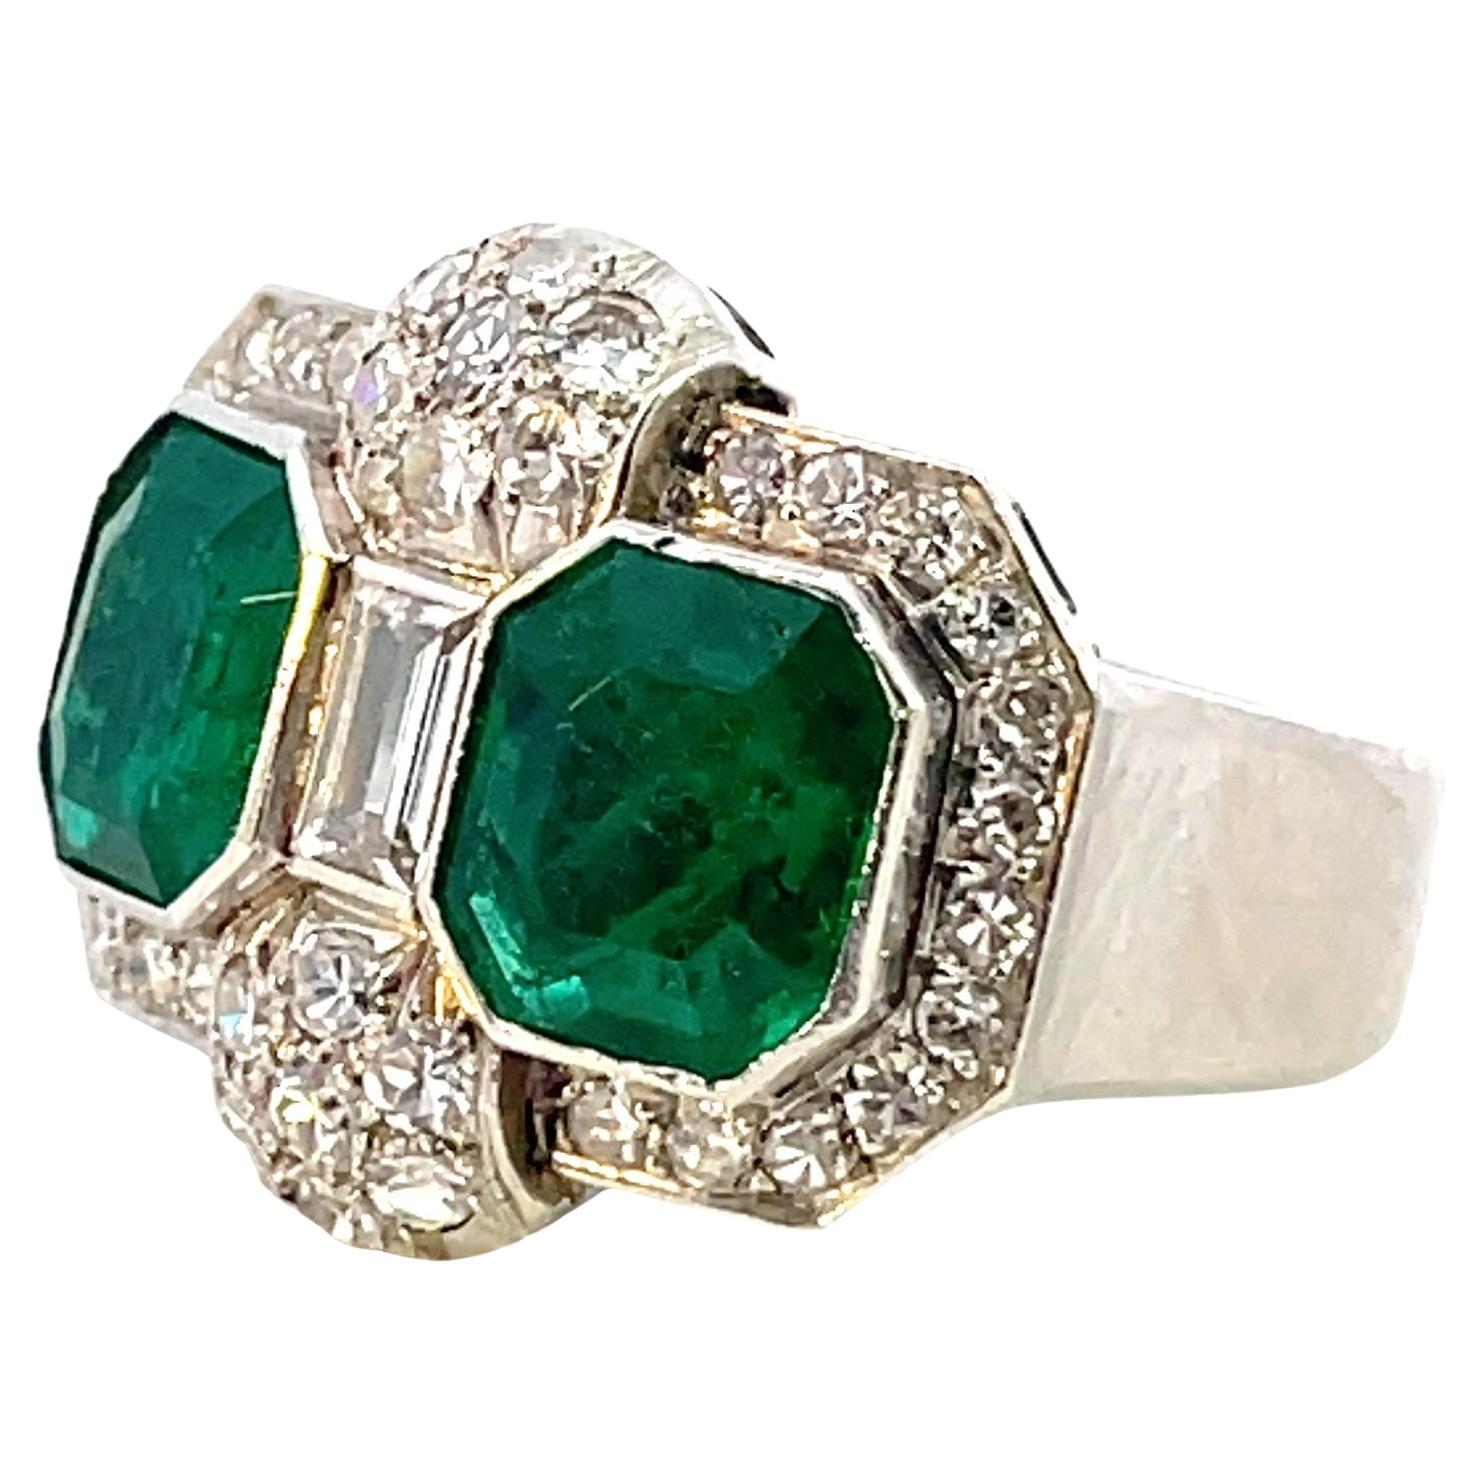 Stunning quality art deco  Colombia emerald platinum ring
fancy 2 bright vivid green gems emeralds weighting approx 2,5 cts each
